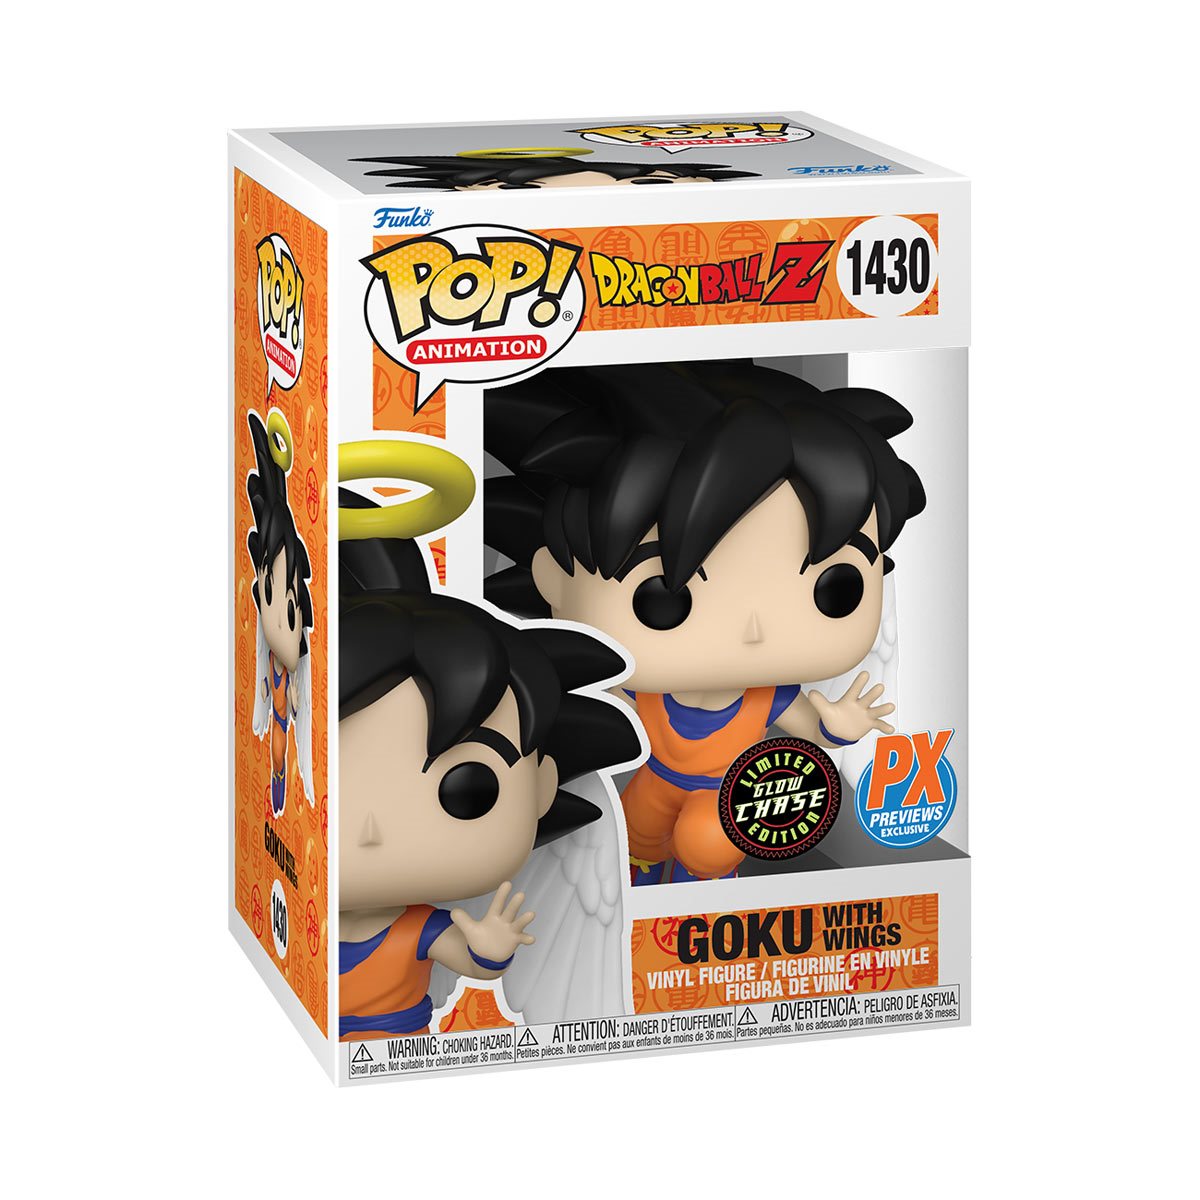 Dragon Ball Z Goku with Wings Funko Pop! Vinyl Figure #1430 - Previews Exclusive in a box chase version - Heretoserveyou